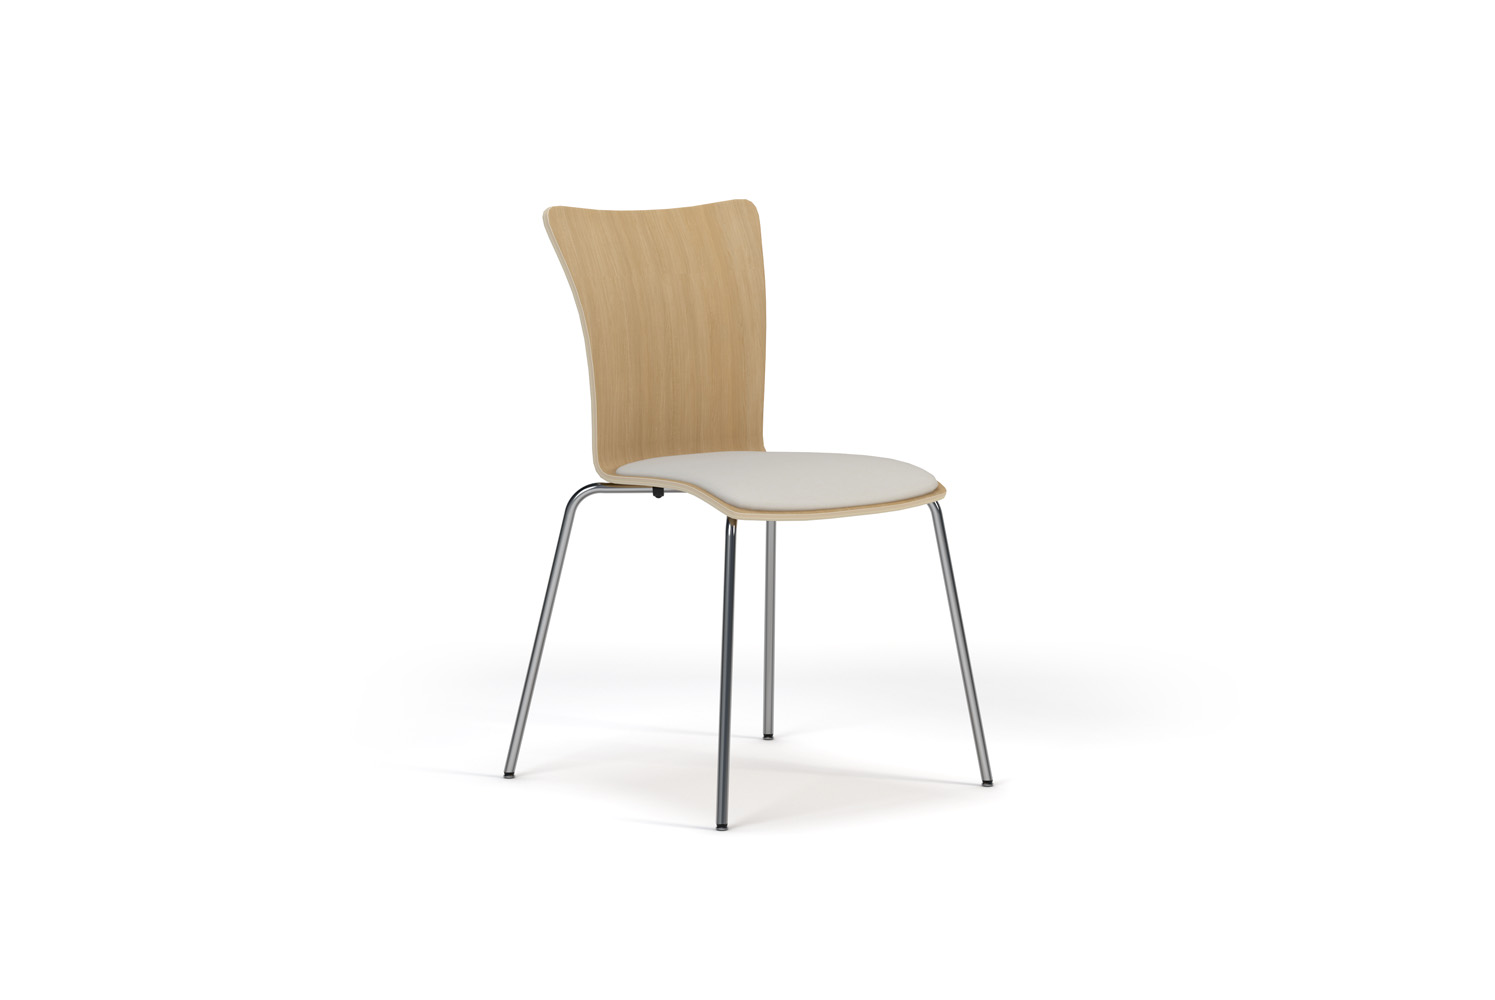 Benton 4 leg chair with Upholstered Seat Insert 